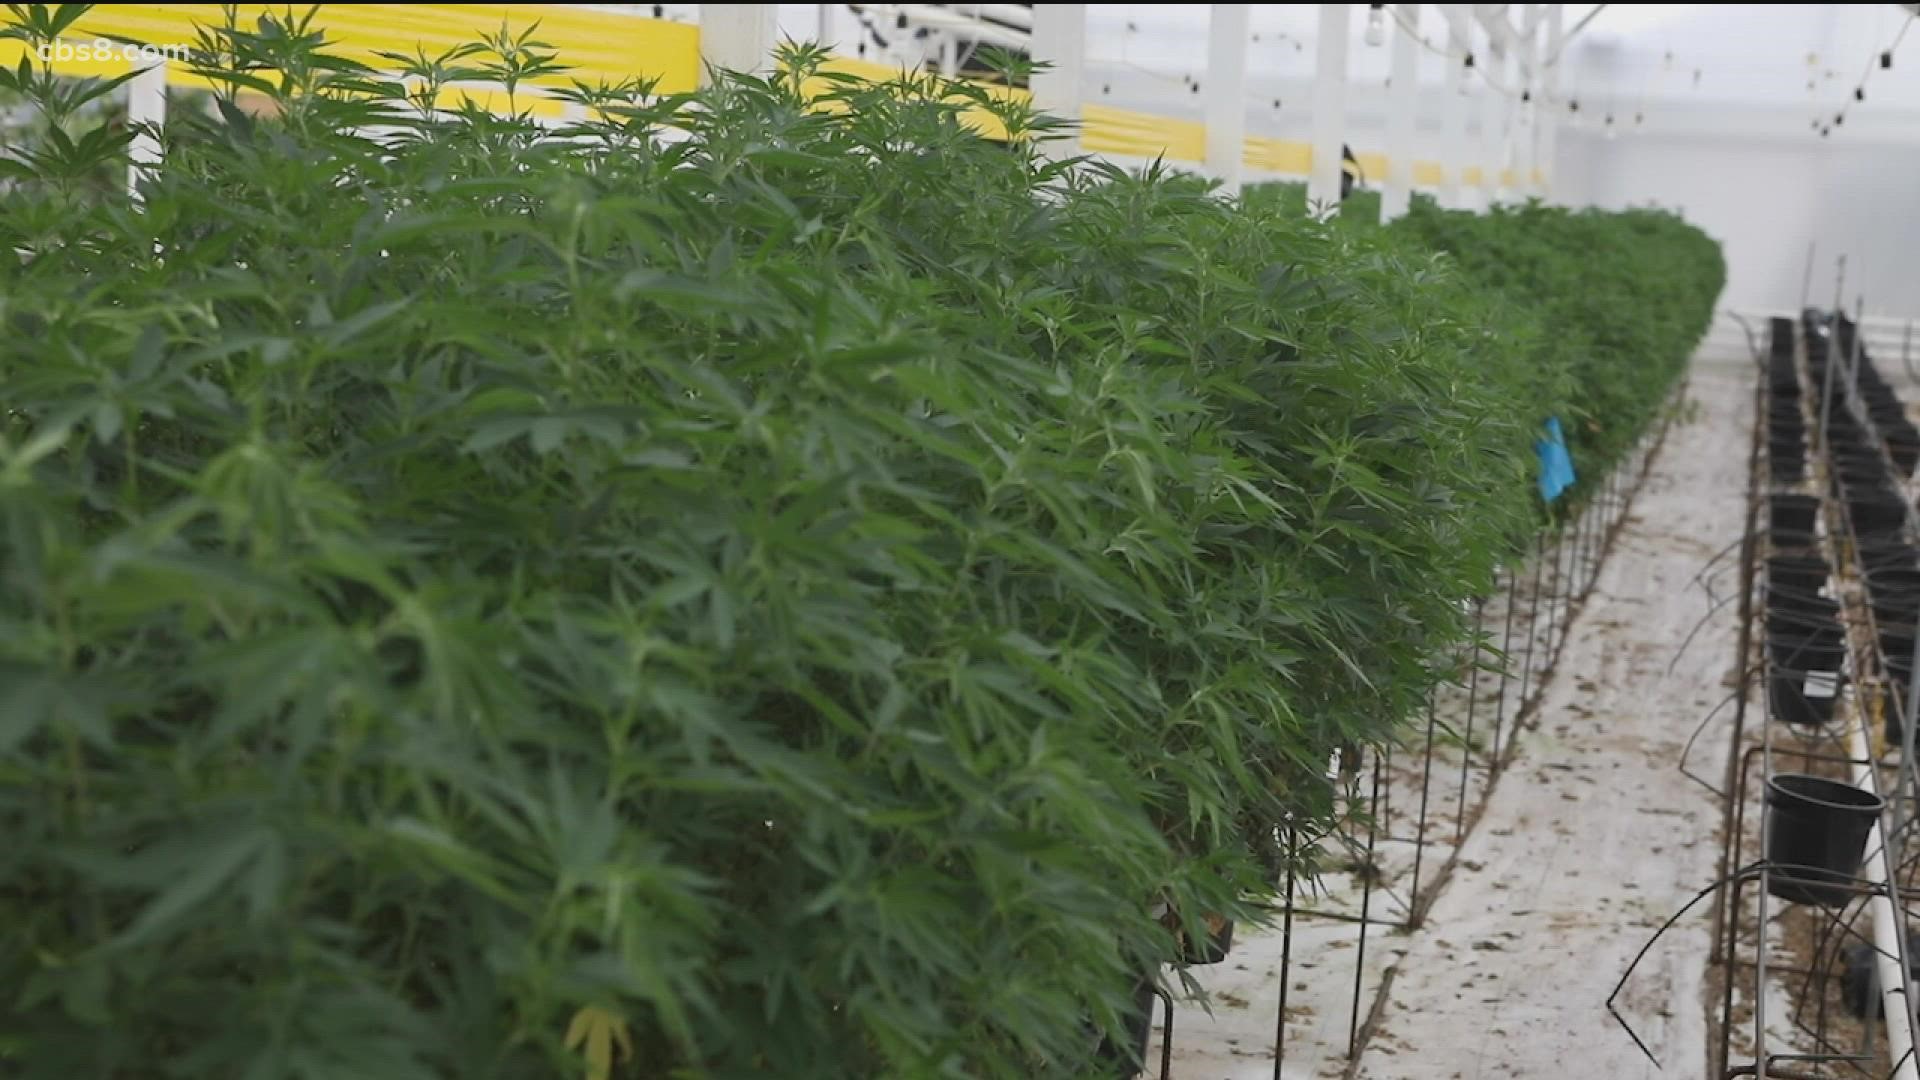 A hemp farm is leaving Encinitas after months of conflict with its neighbors, but the controversy surrounding it hasn’t gone away.